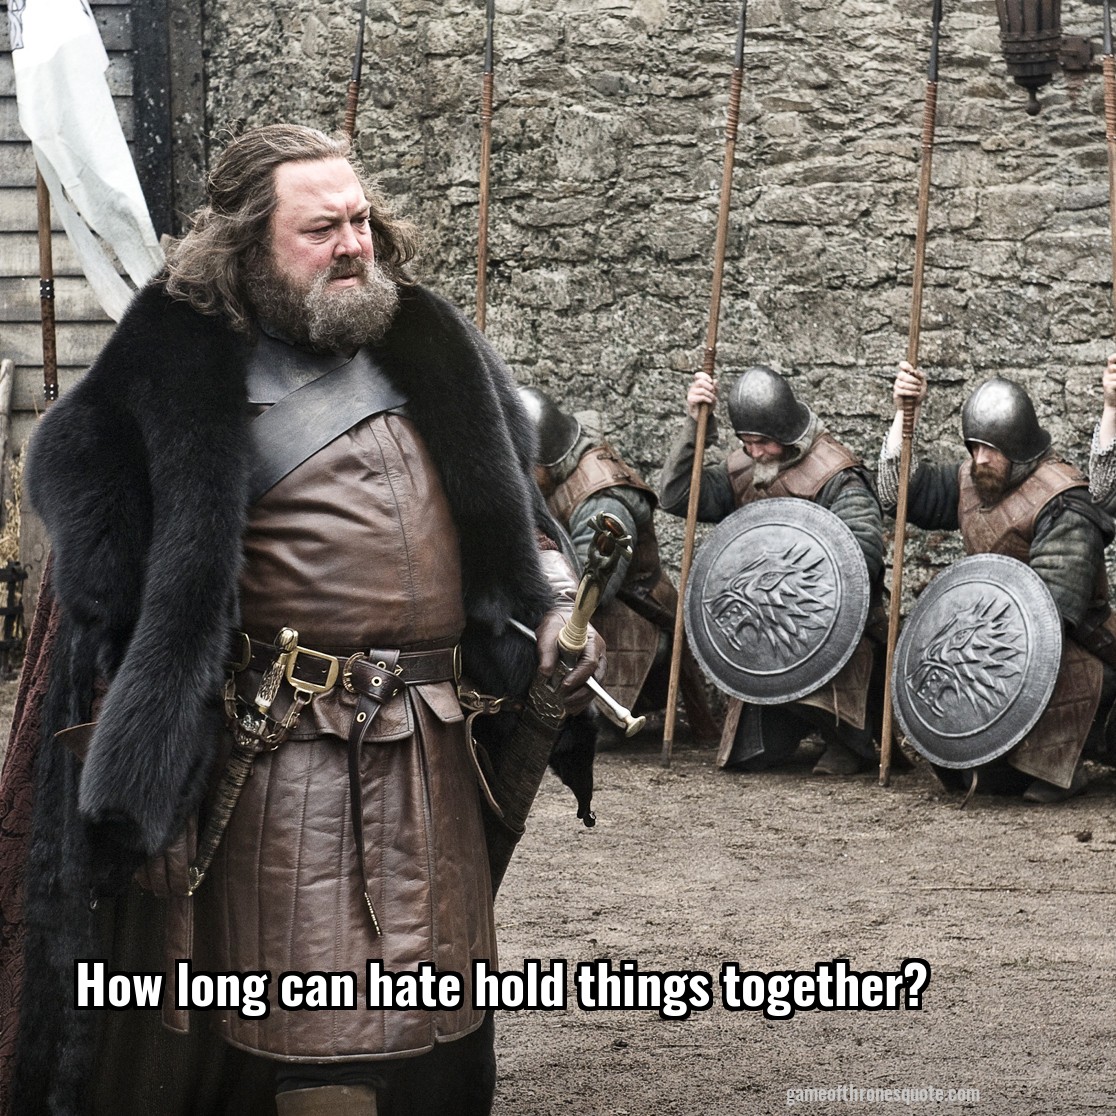 How long can hate hold things together?